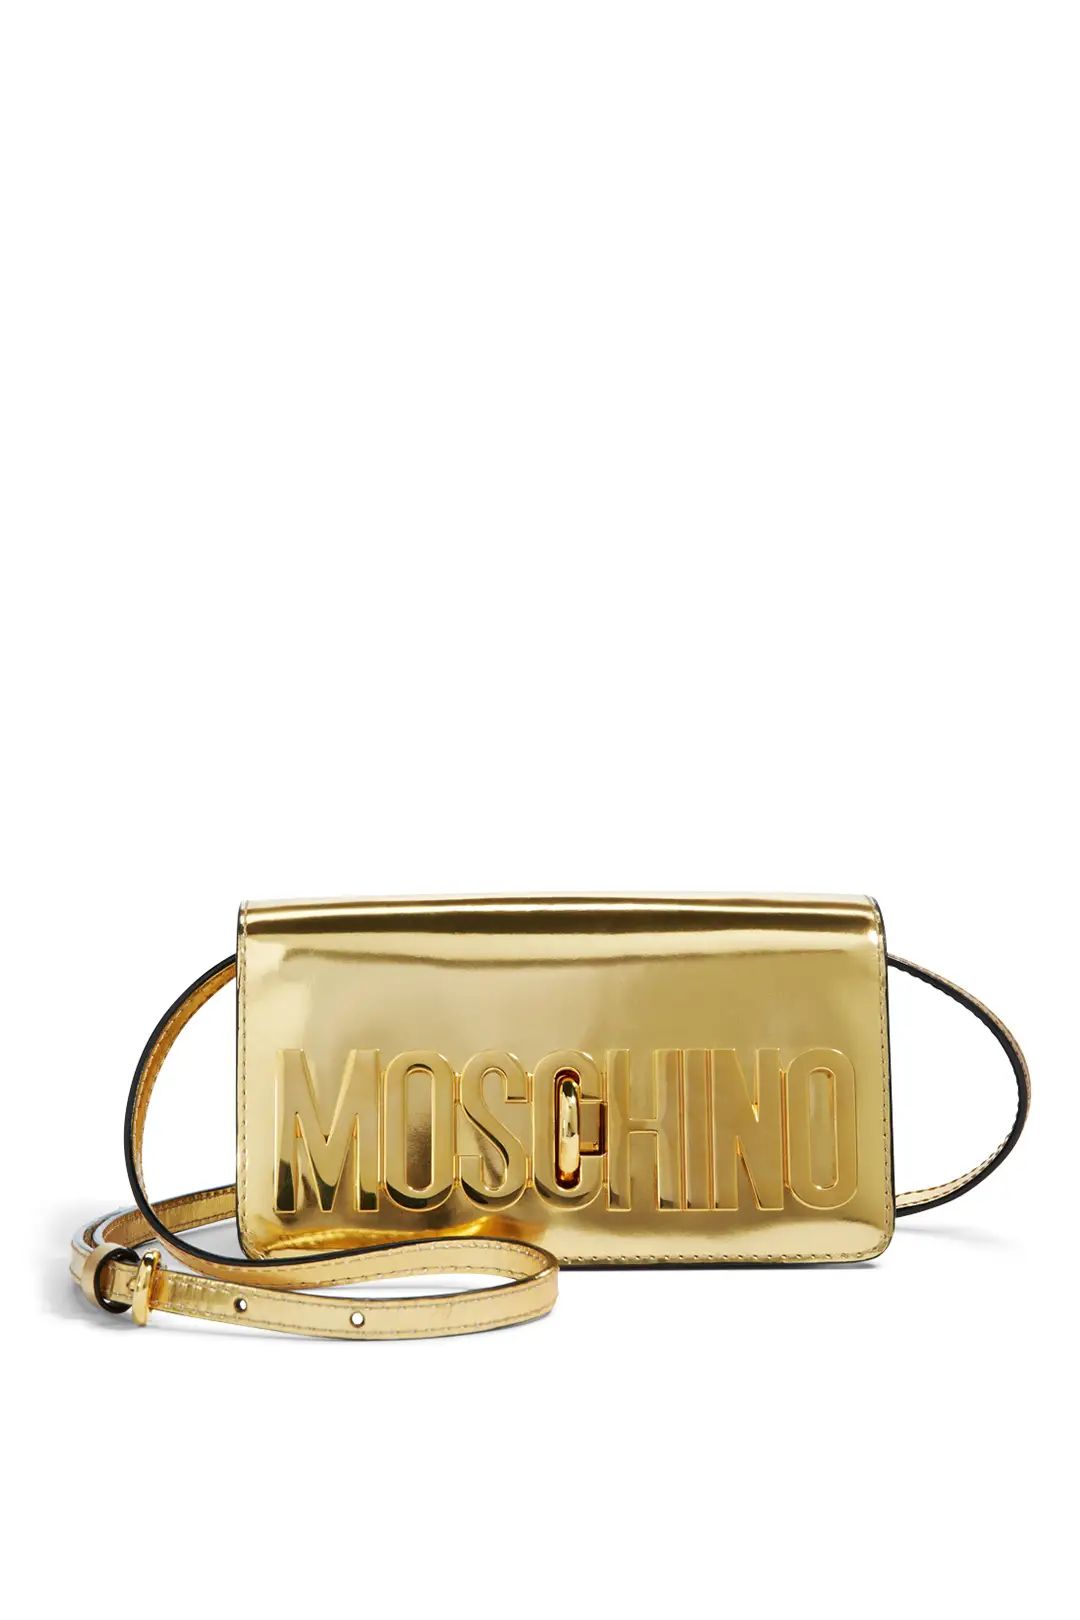 Moschino Accessories Gold Make Your Mark Bag | Rent The Runway